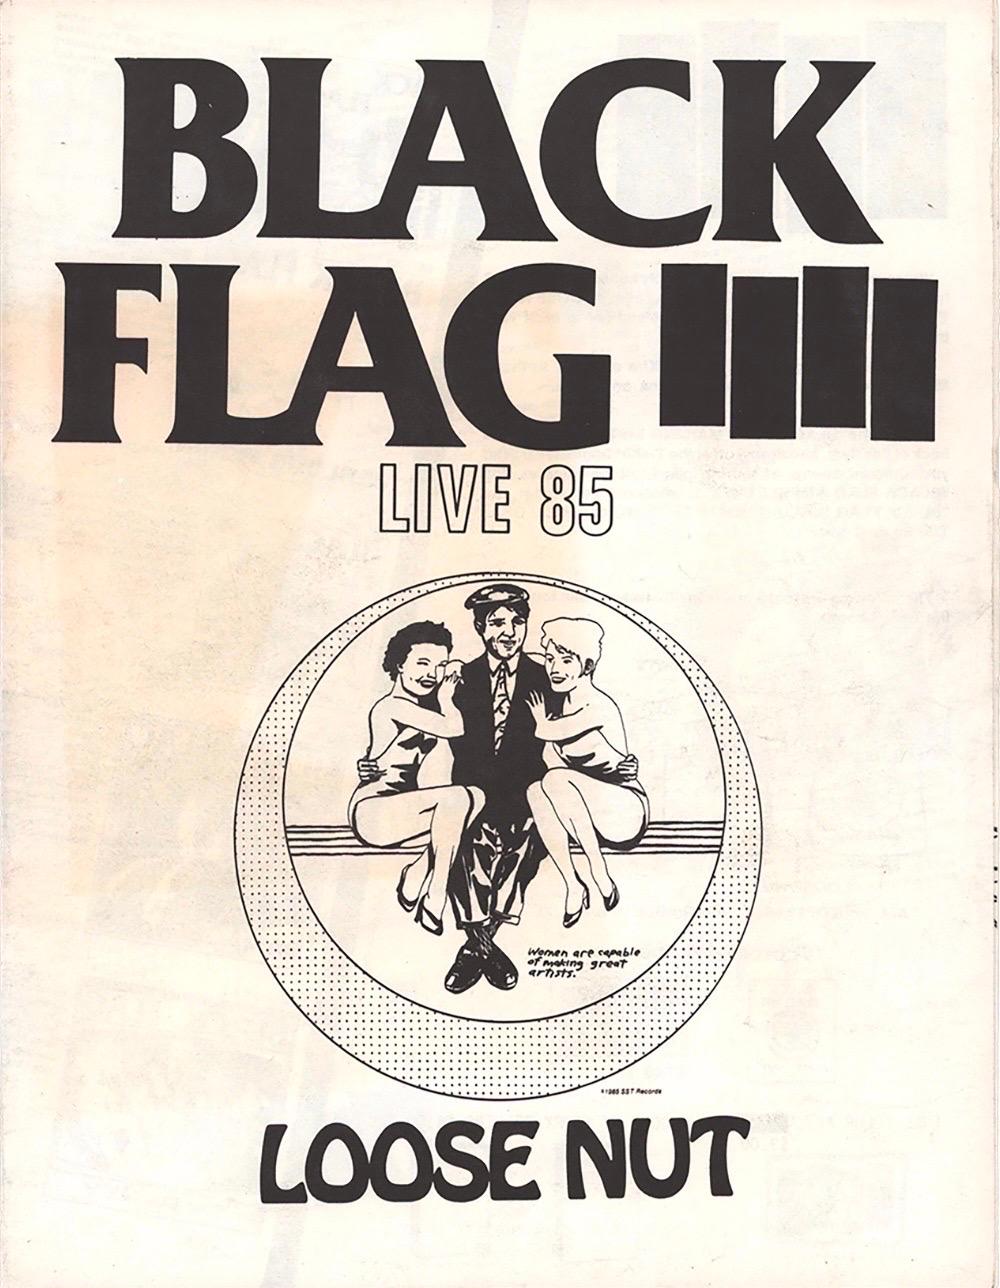 Raymond Pettibon, 'Black Flag Live ‘85 Loose Nut':
Folding double-sided merchandise flyer illustrated by Raymond Pettibon for SST Records advertising Black Flag records and Raymond Pettibon books (image 4). 

Off-set printed; 8.5 x 11 inches folded